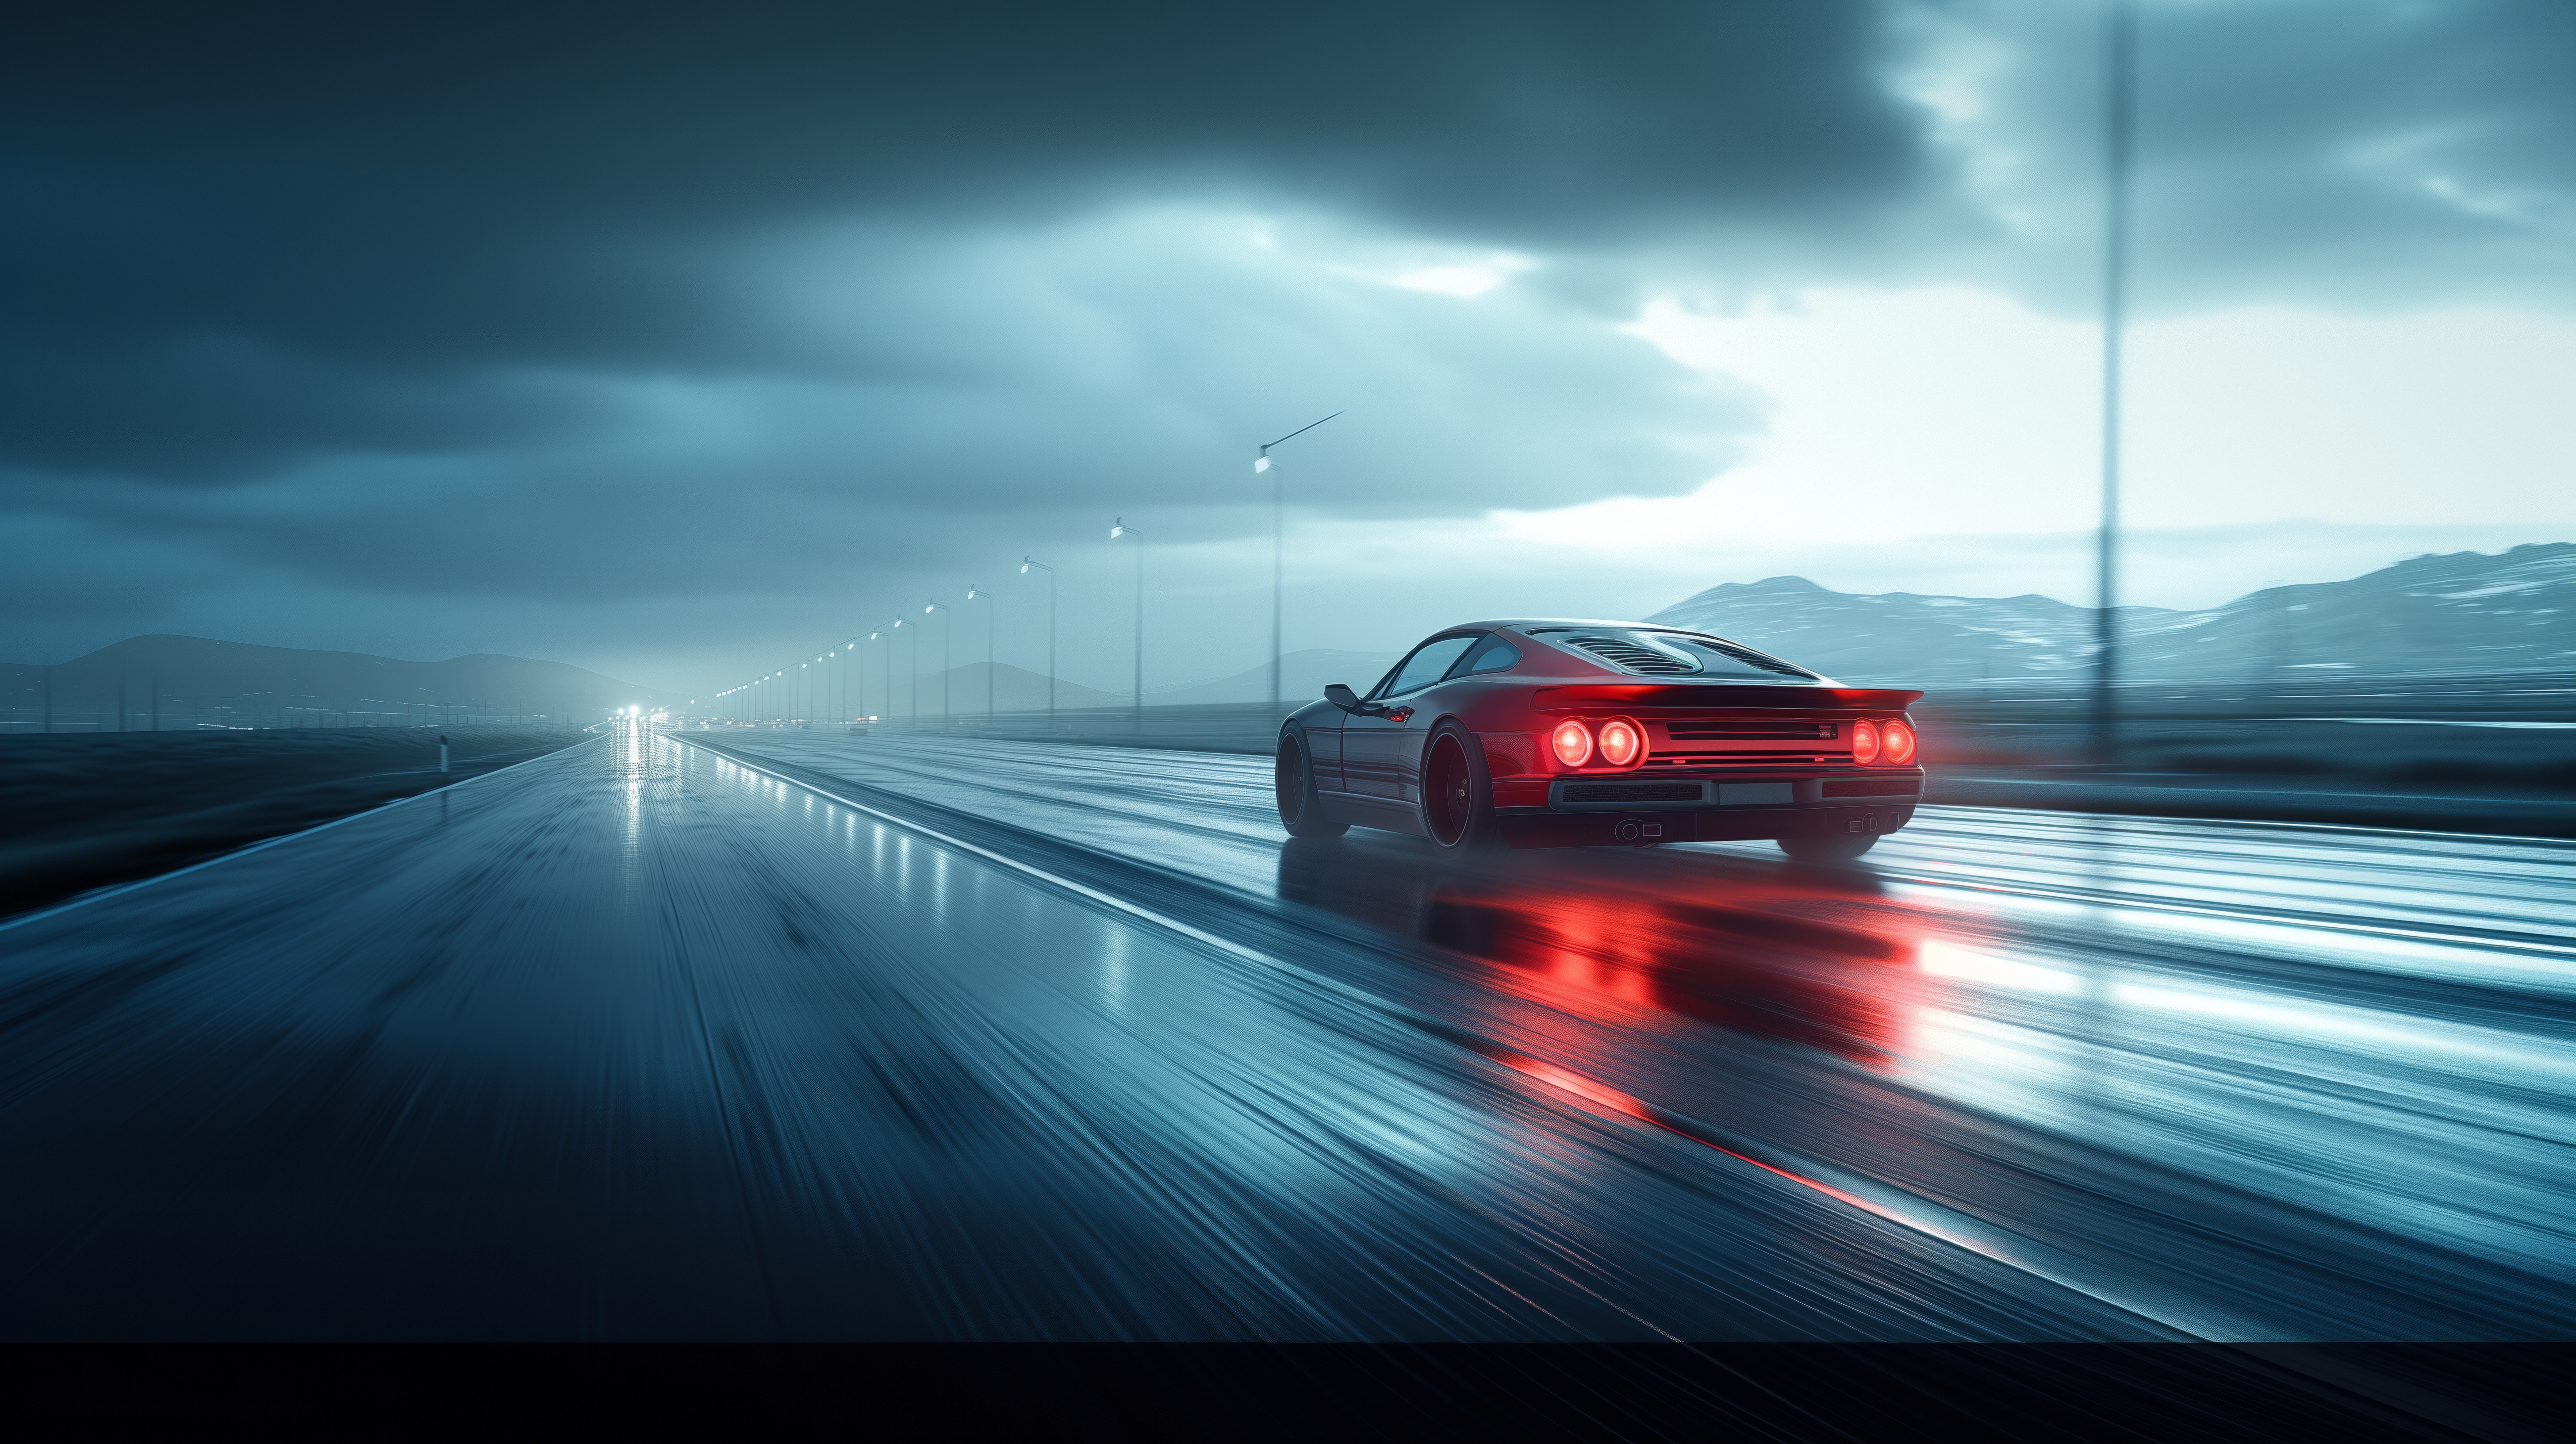 General 5824x3264 AI art clouds driving sports car highway motion blur taillights rear view vehicle road sky blurred street light